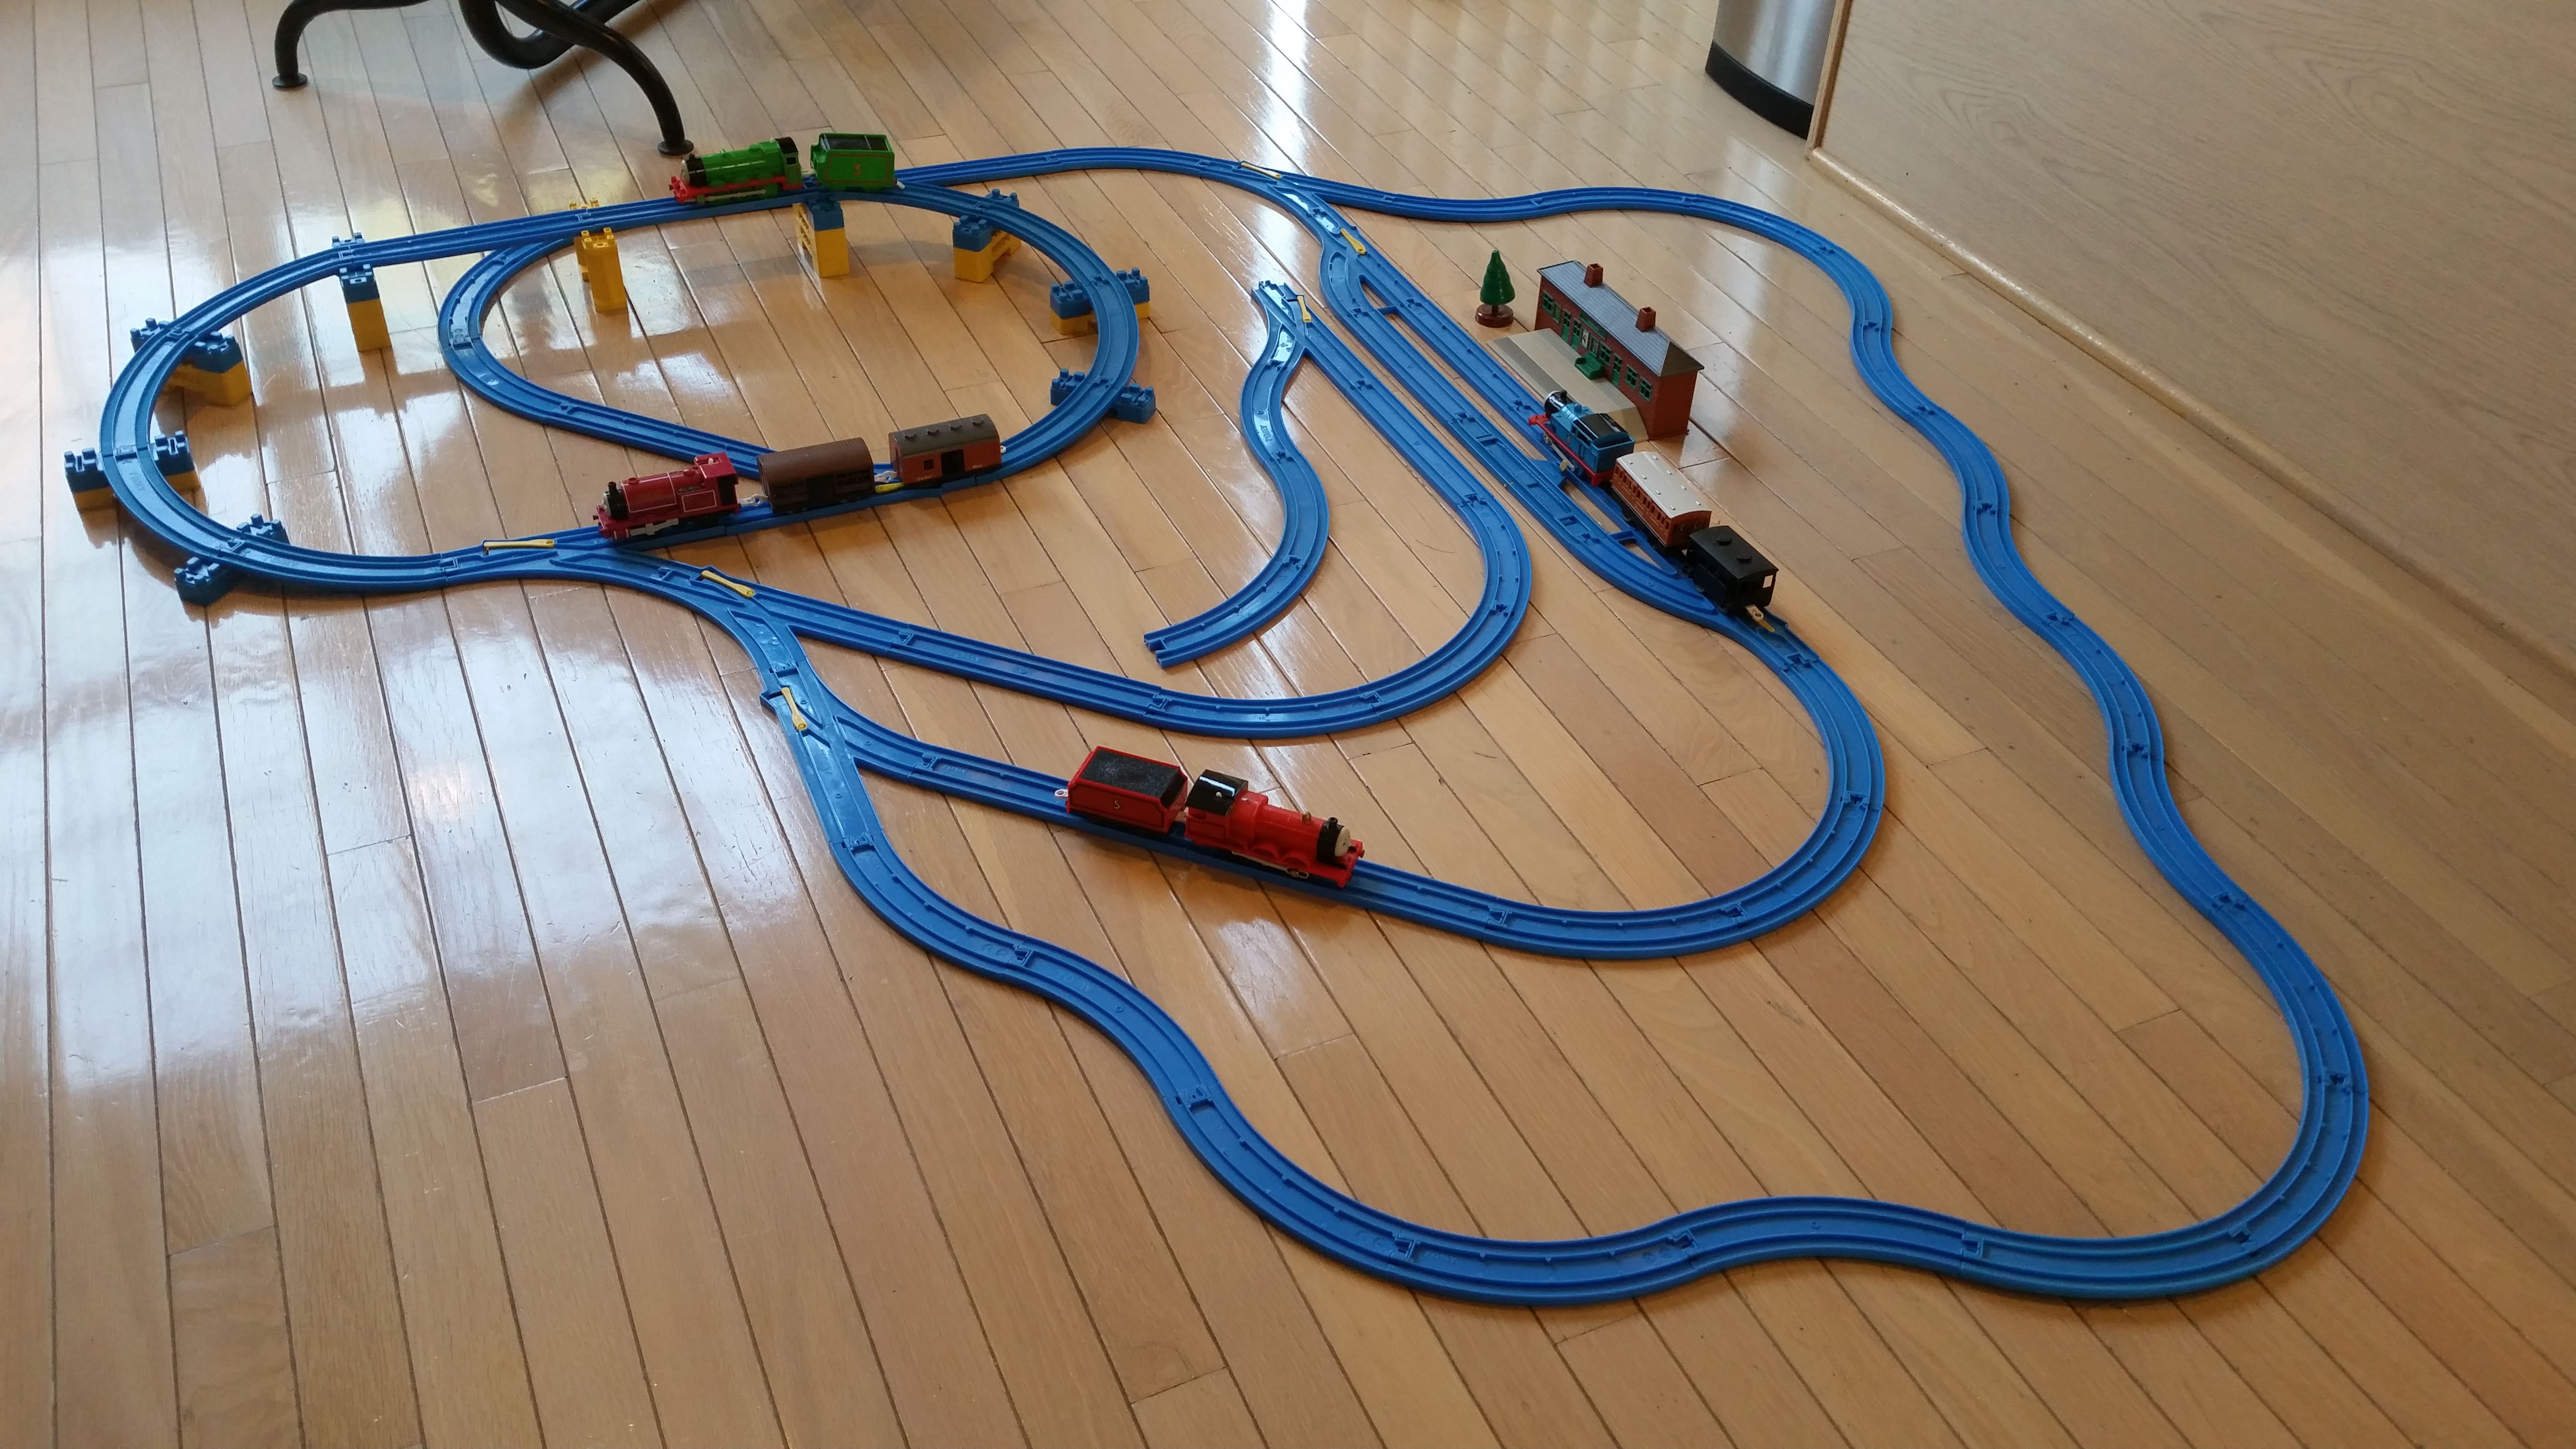 Battery Operated Thomas the Train Set